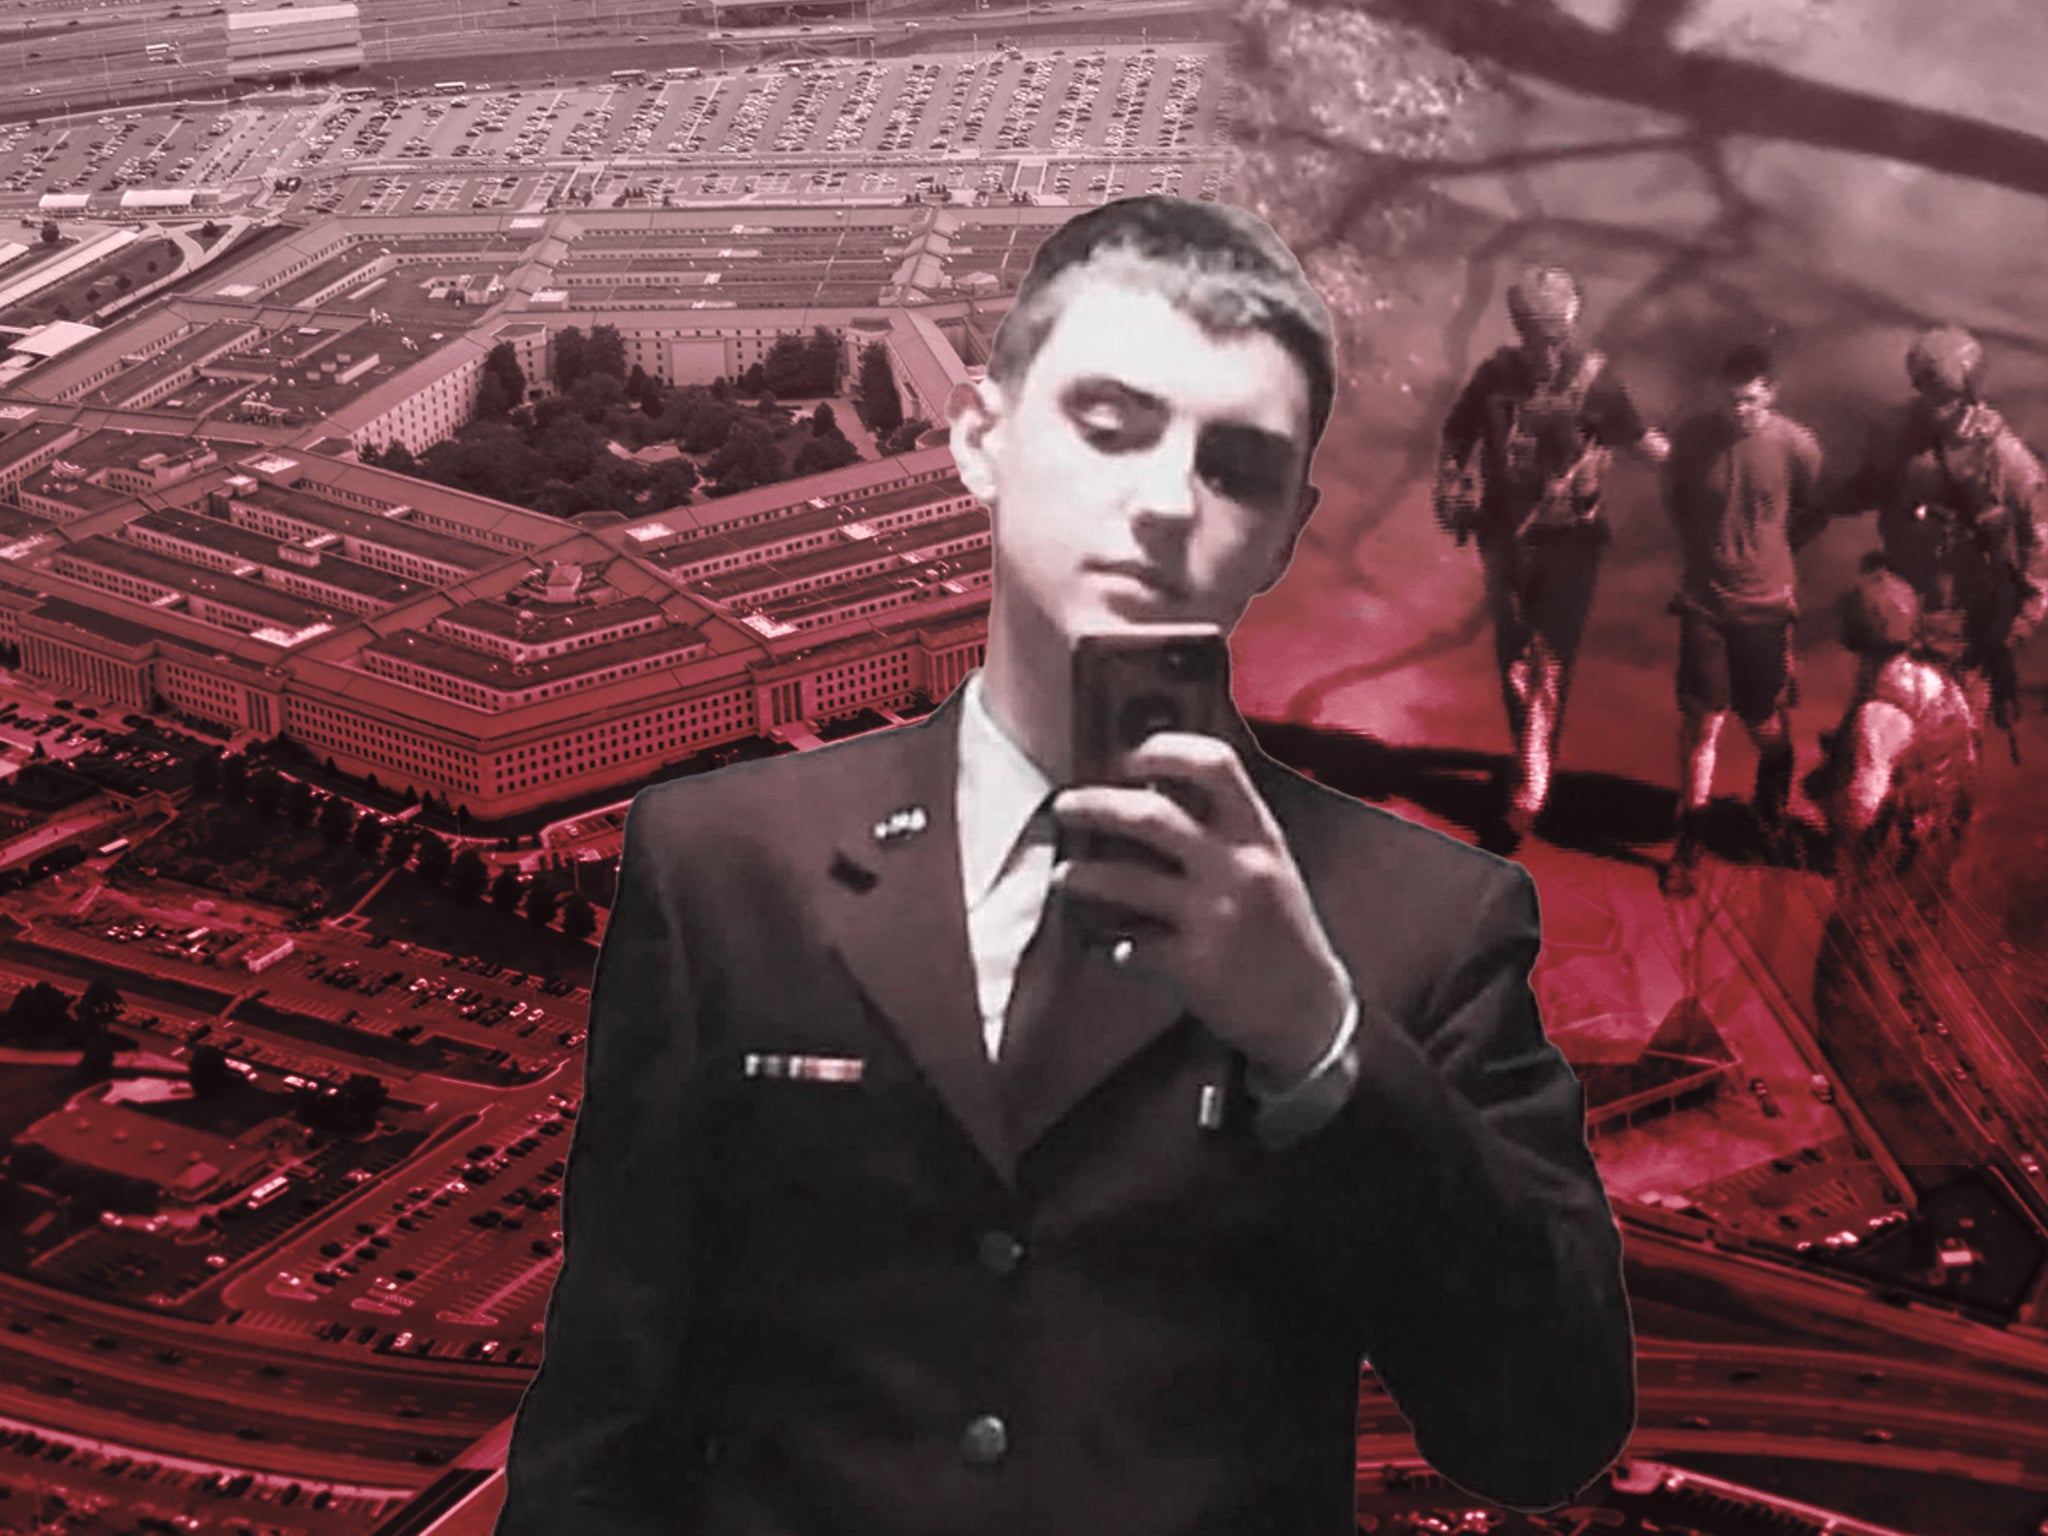 Discord leak: Guardsman indicted over classified documents